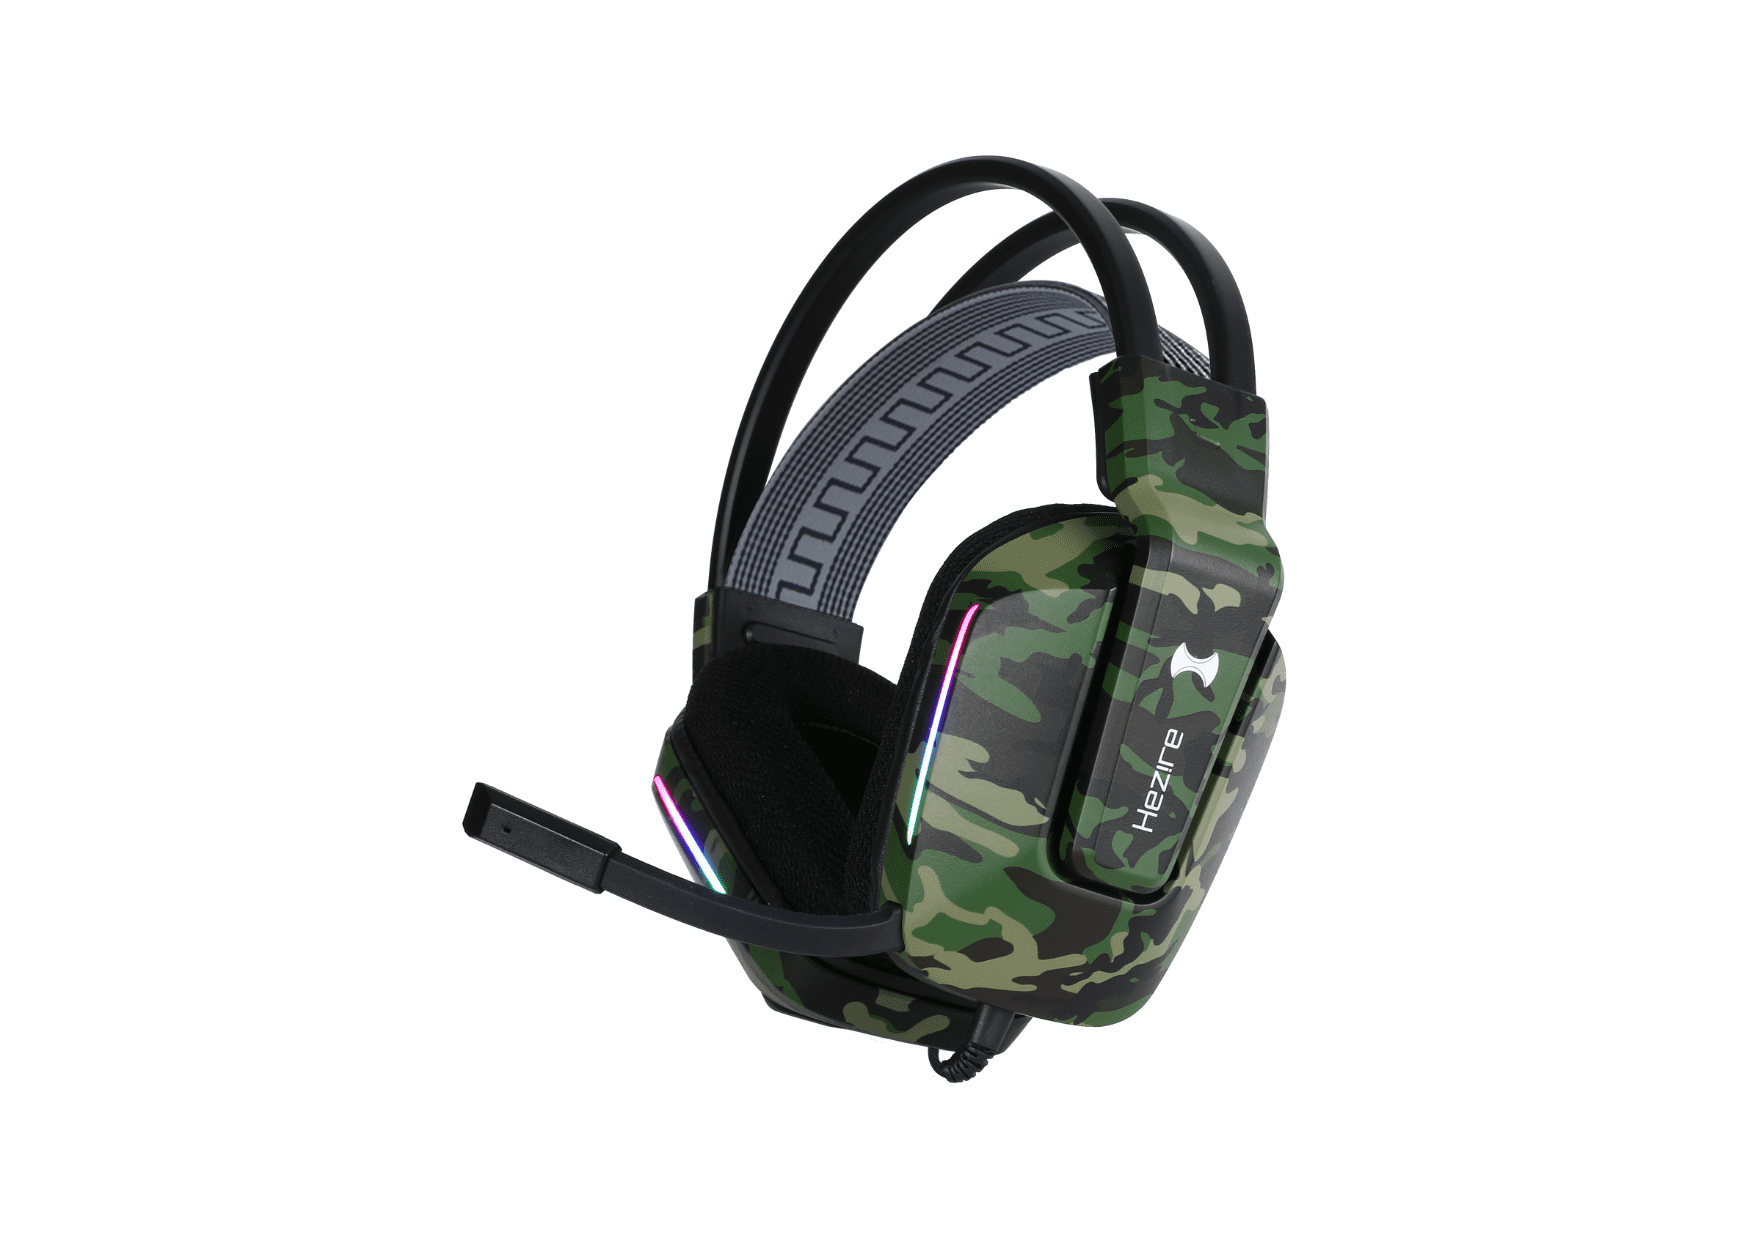 Hezire GHS-100 Wired Gaming Headset